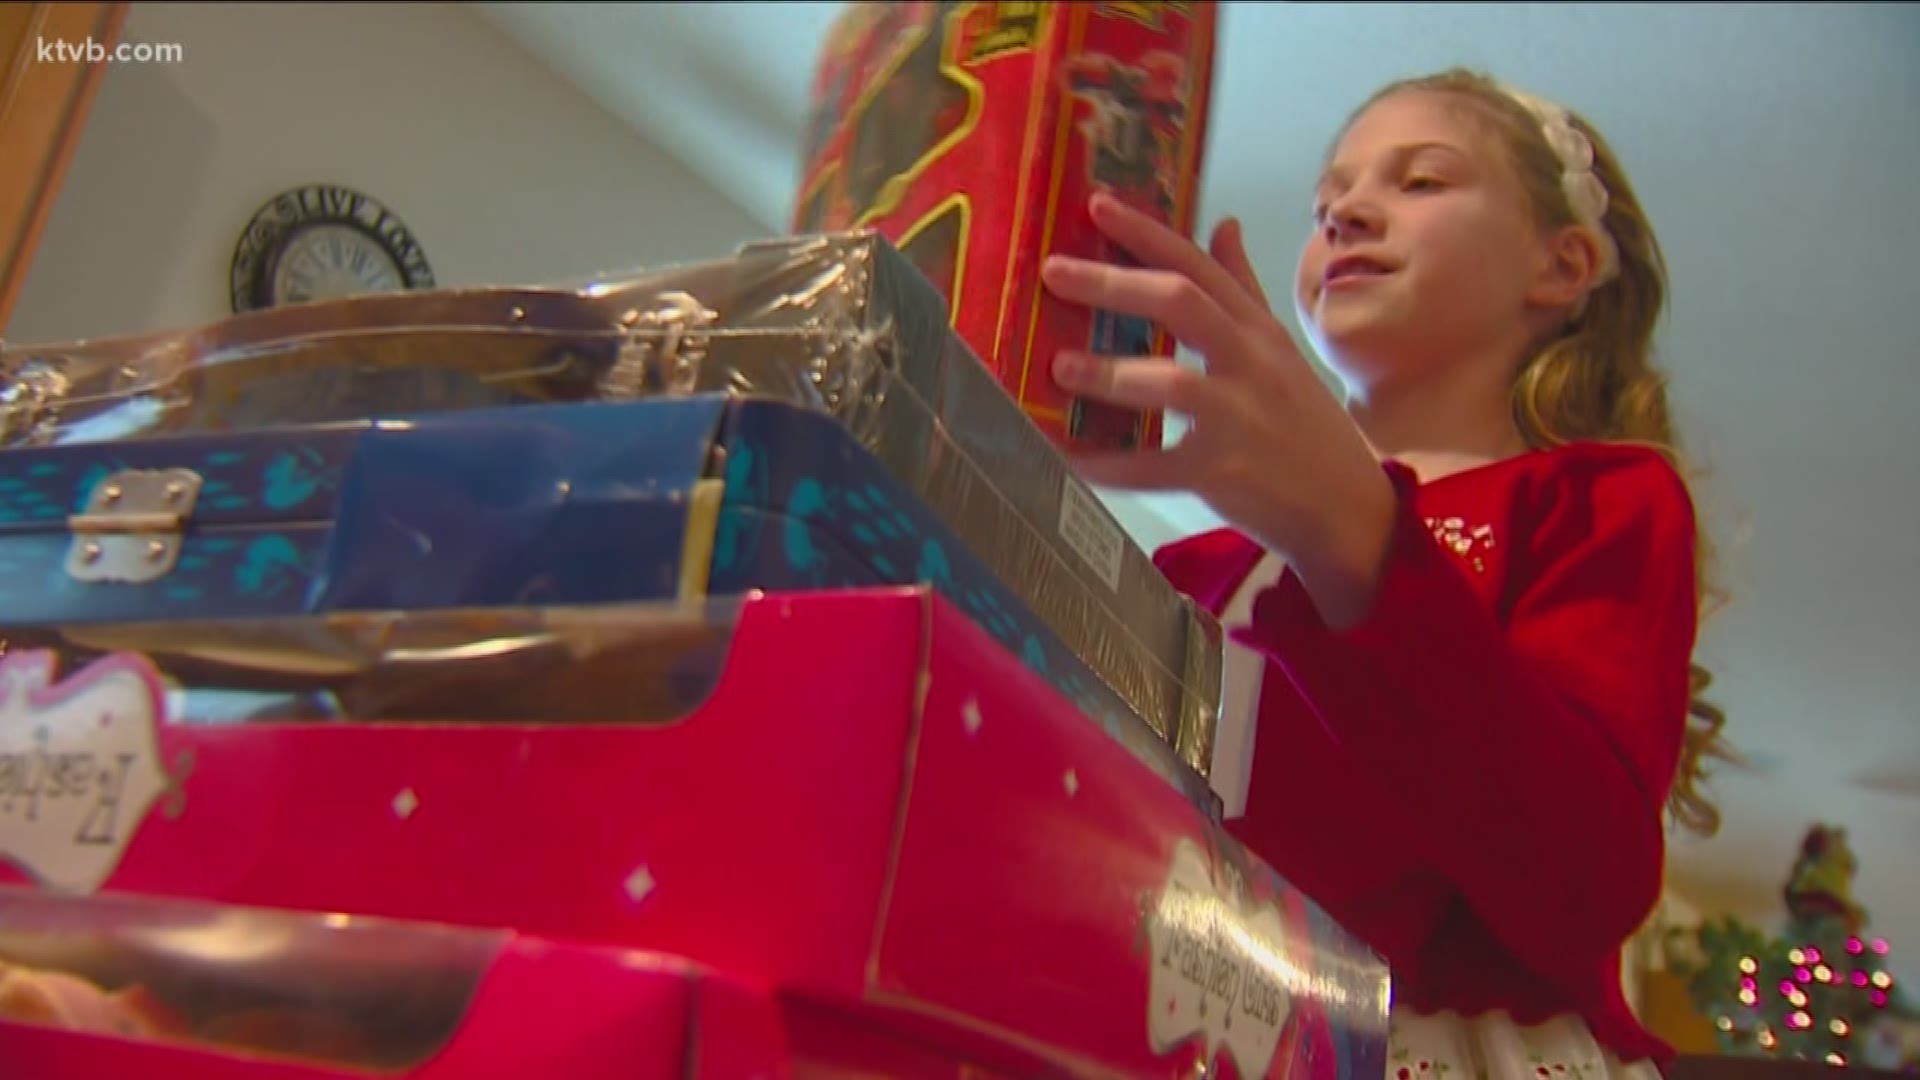 Chloe Lesmeister held bake sales and fundraisers that have raised thousands of dollars to buy toys for kids who have to spend their holidays in the hospital.